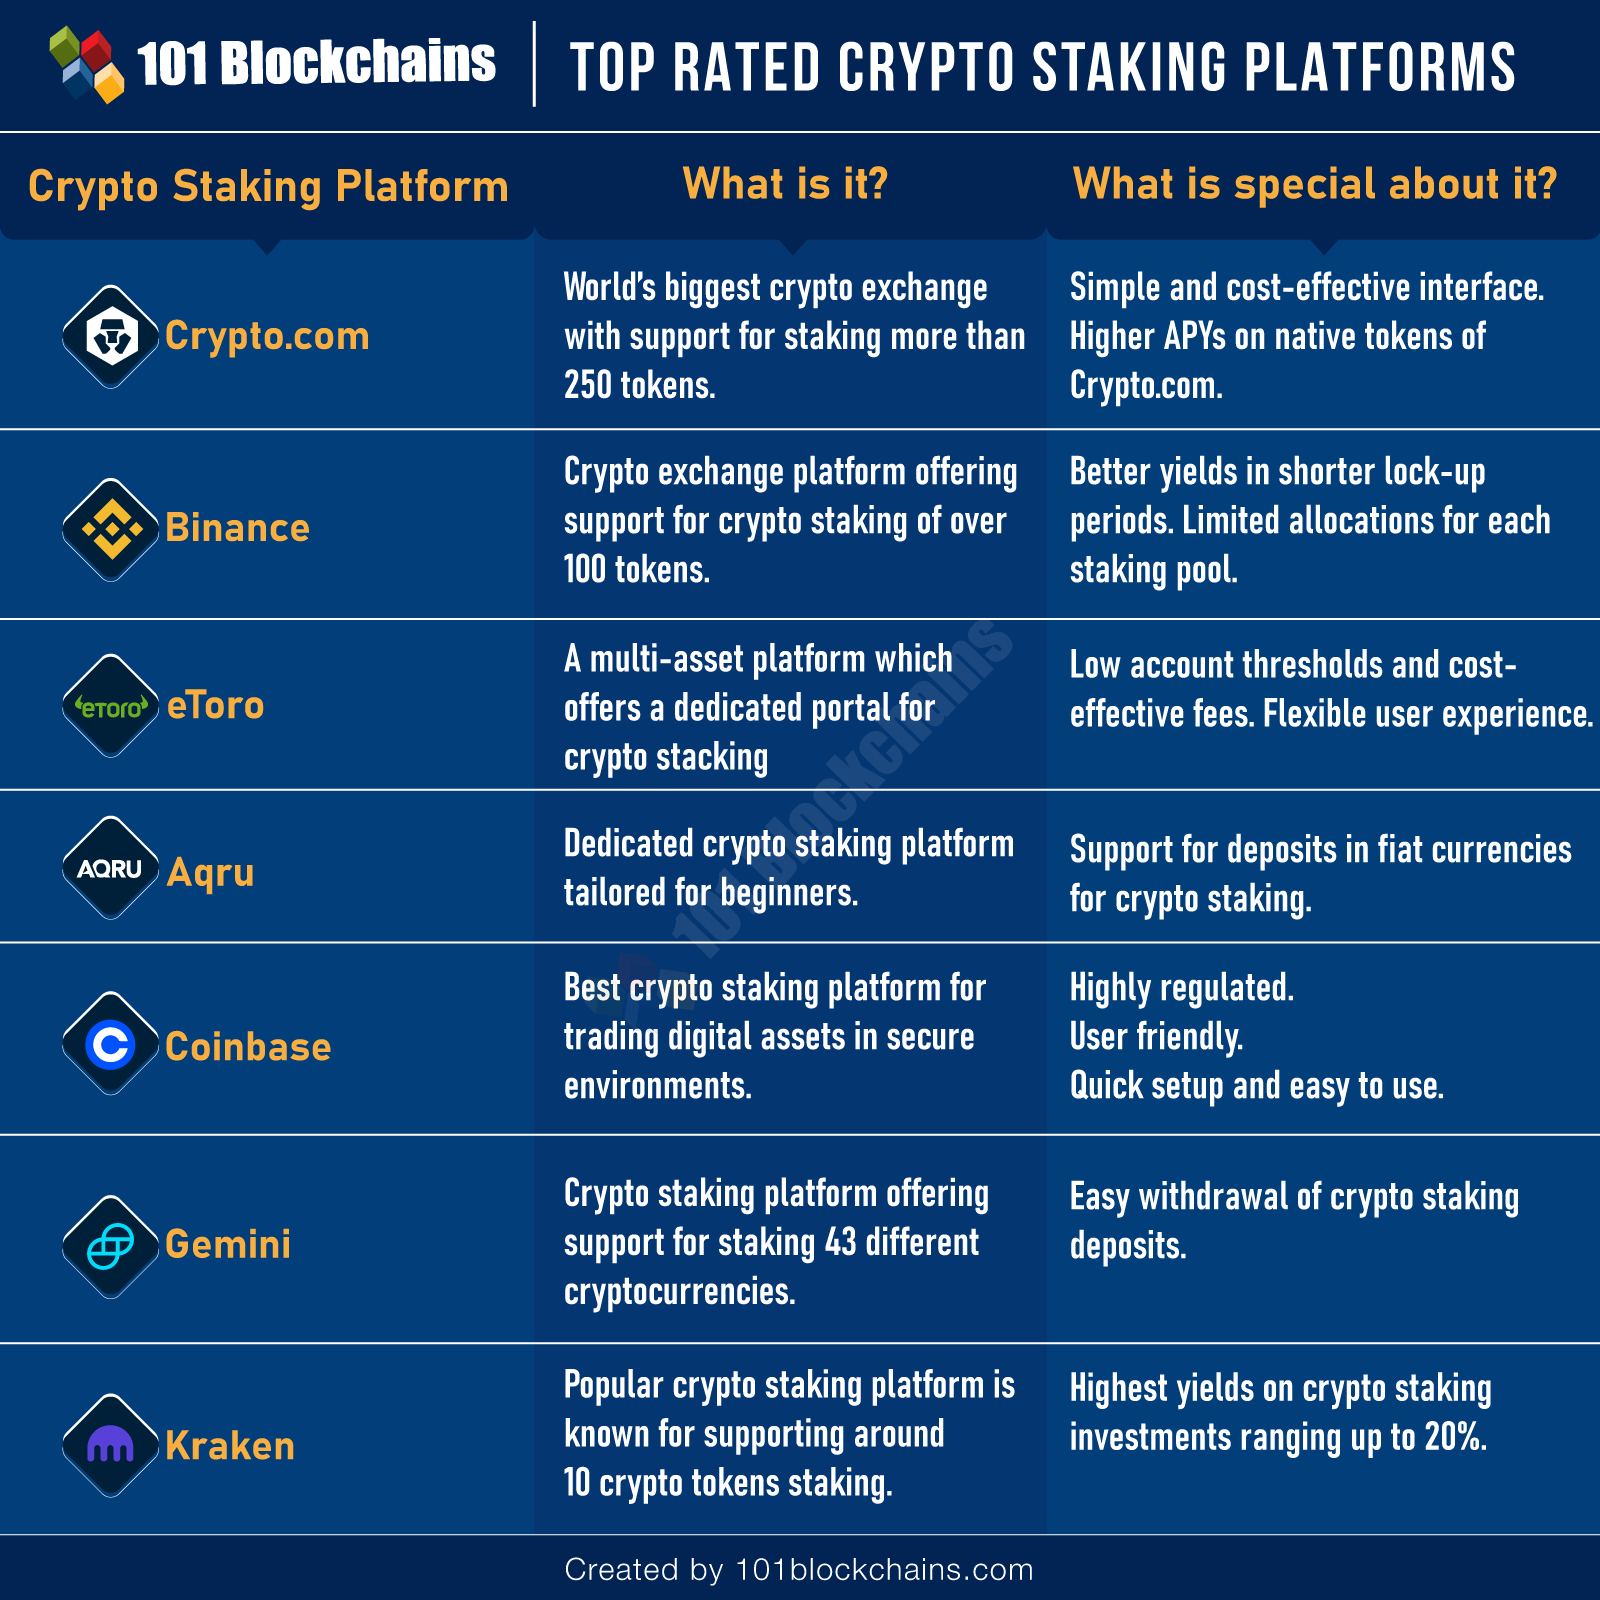 Top Rated Crypto Staking Platforms